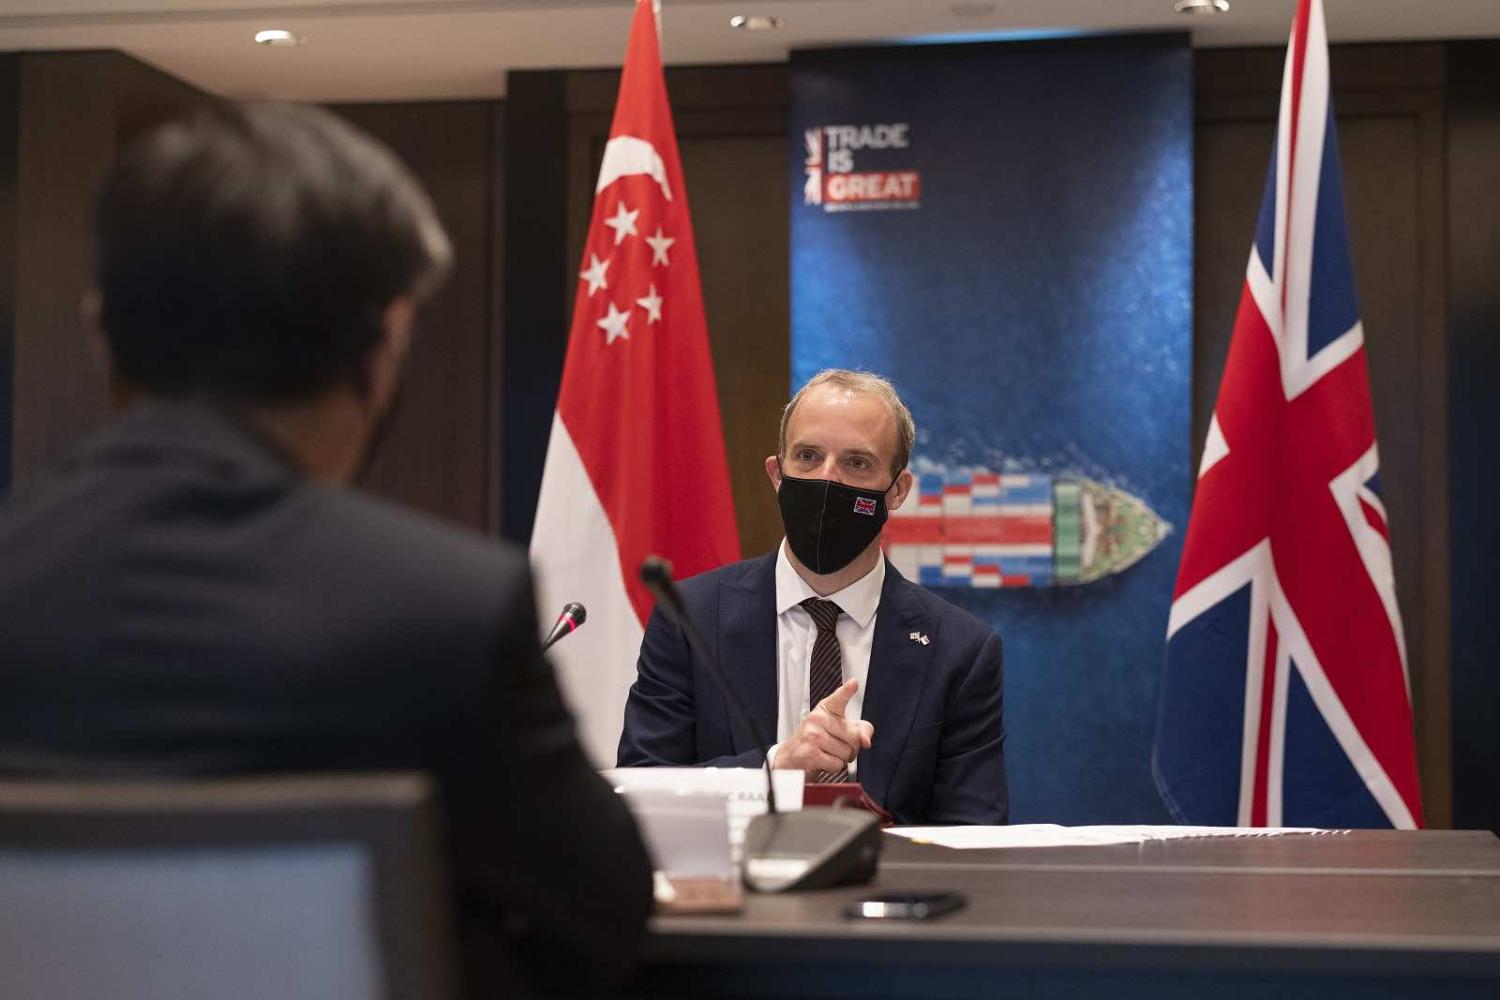 UK Foreign Secretary Dominic Raab holds a roundtable with business leaders during his visit to Singapore, 24 June 2021 (Simon Dawson/No 10 Downing Street/Flickr)